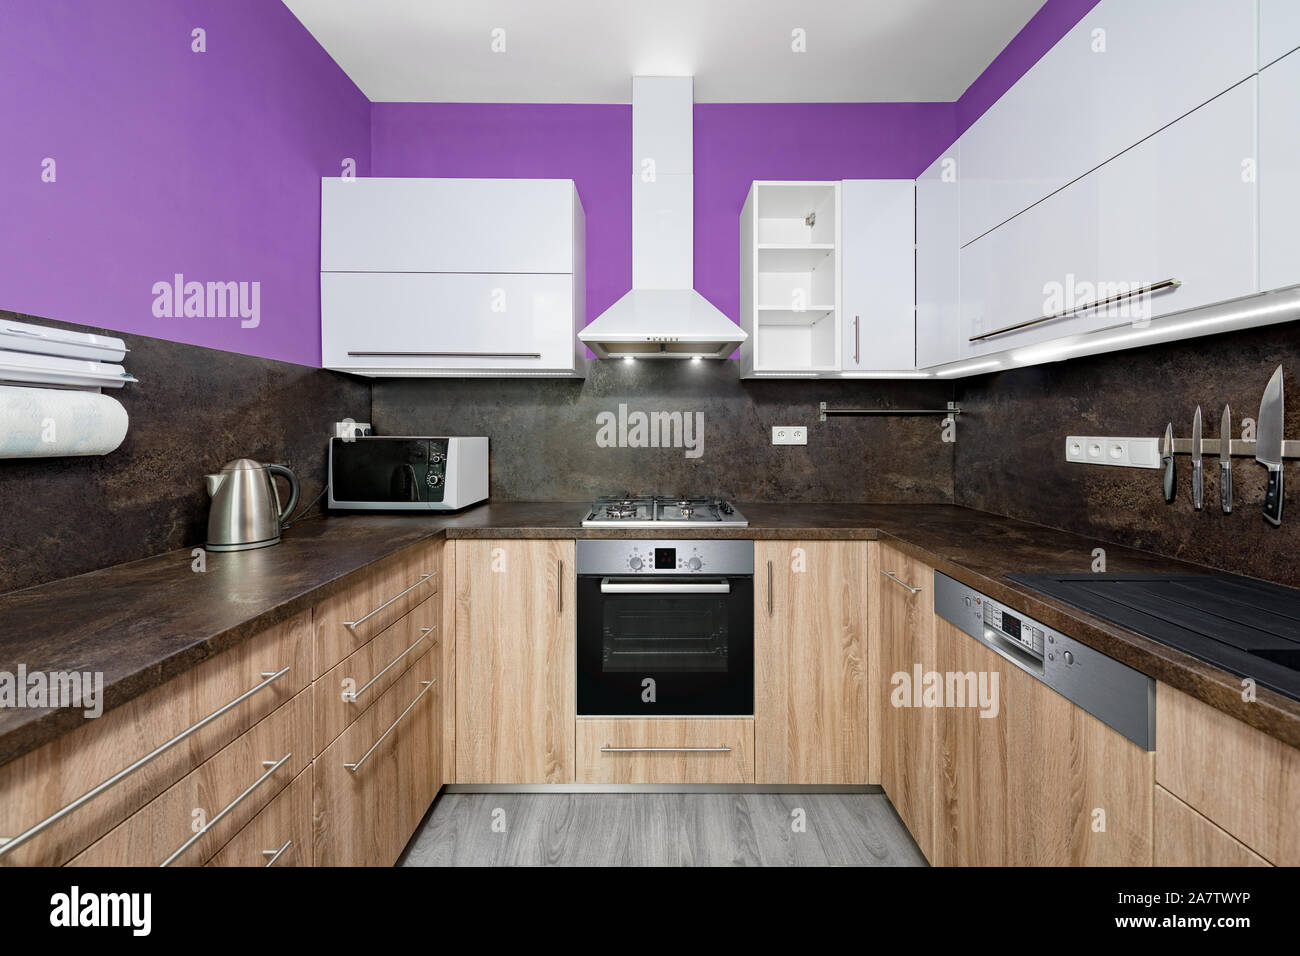 Modern kitchens combined with white and purple color and oak wood. Stock Photo